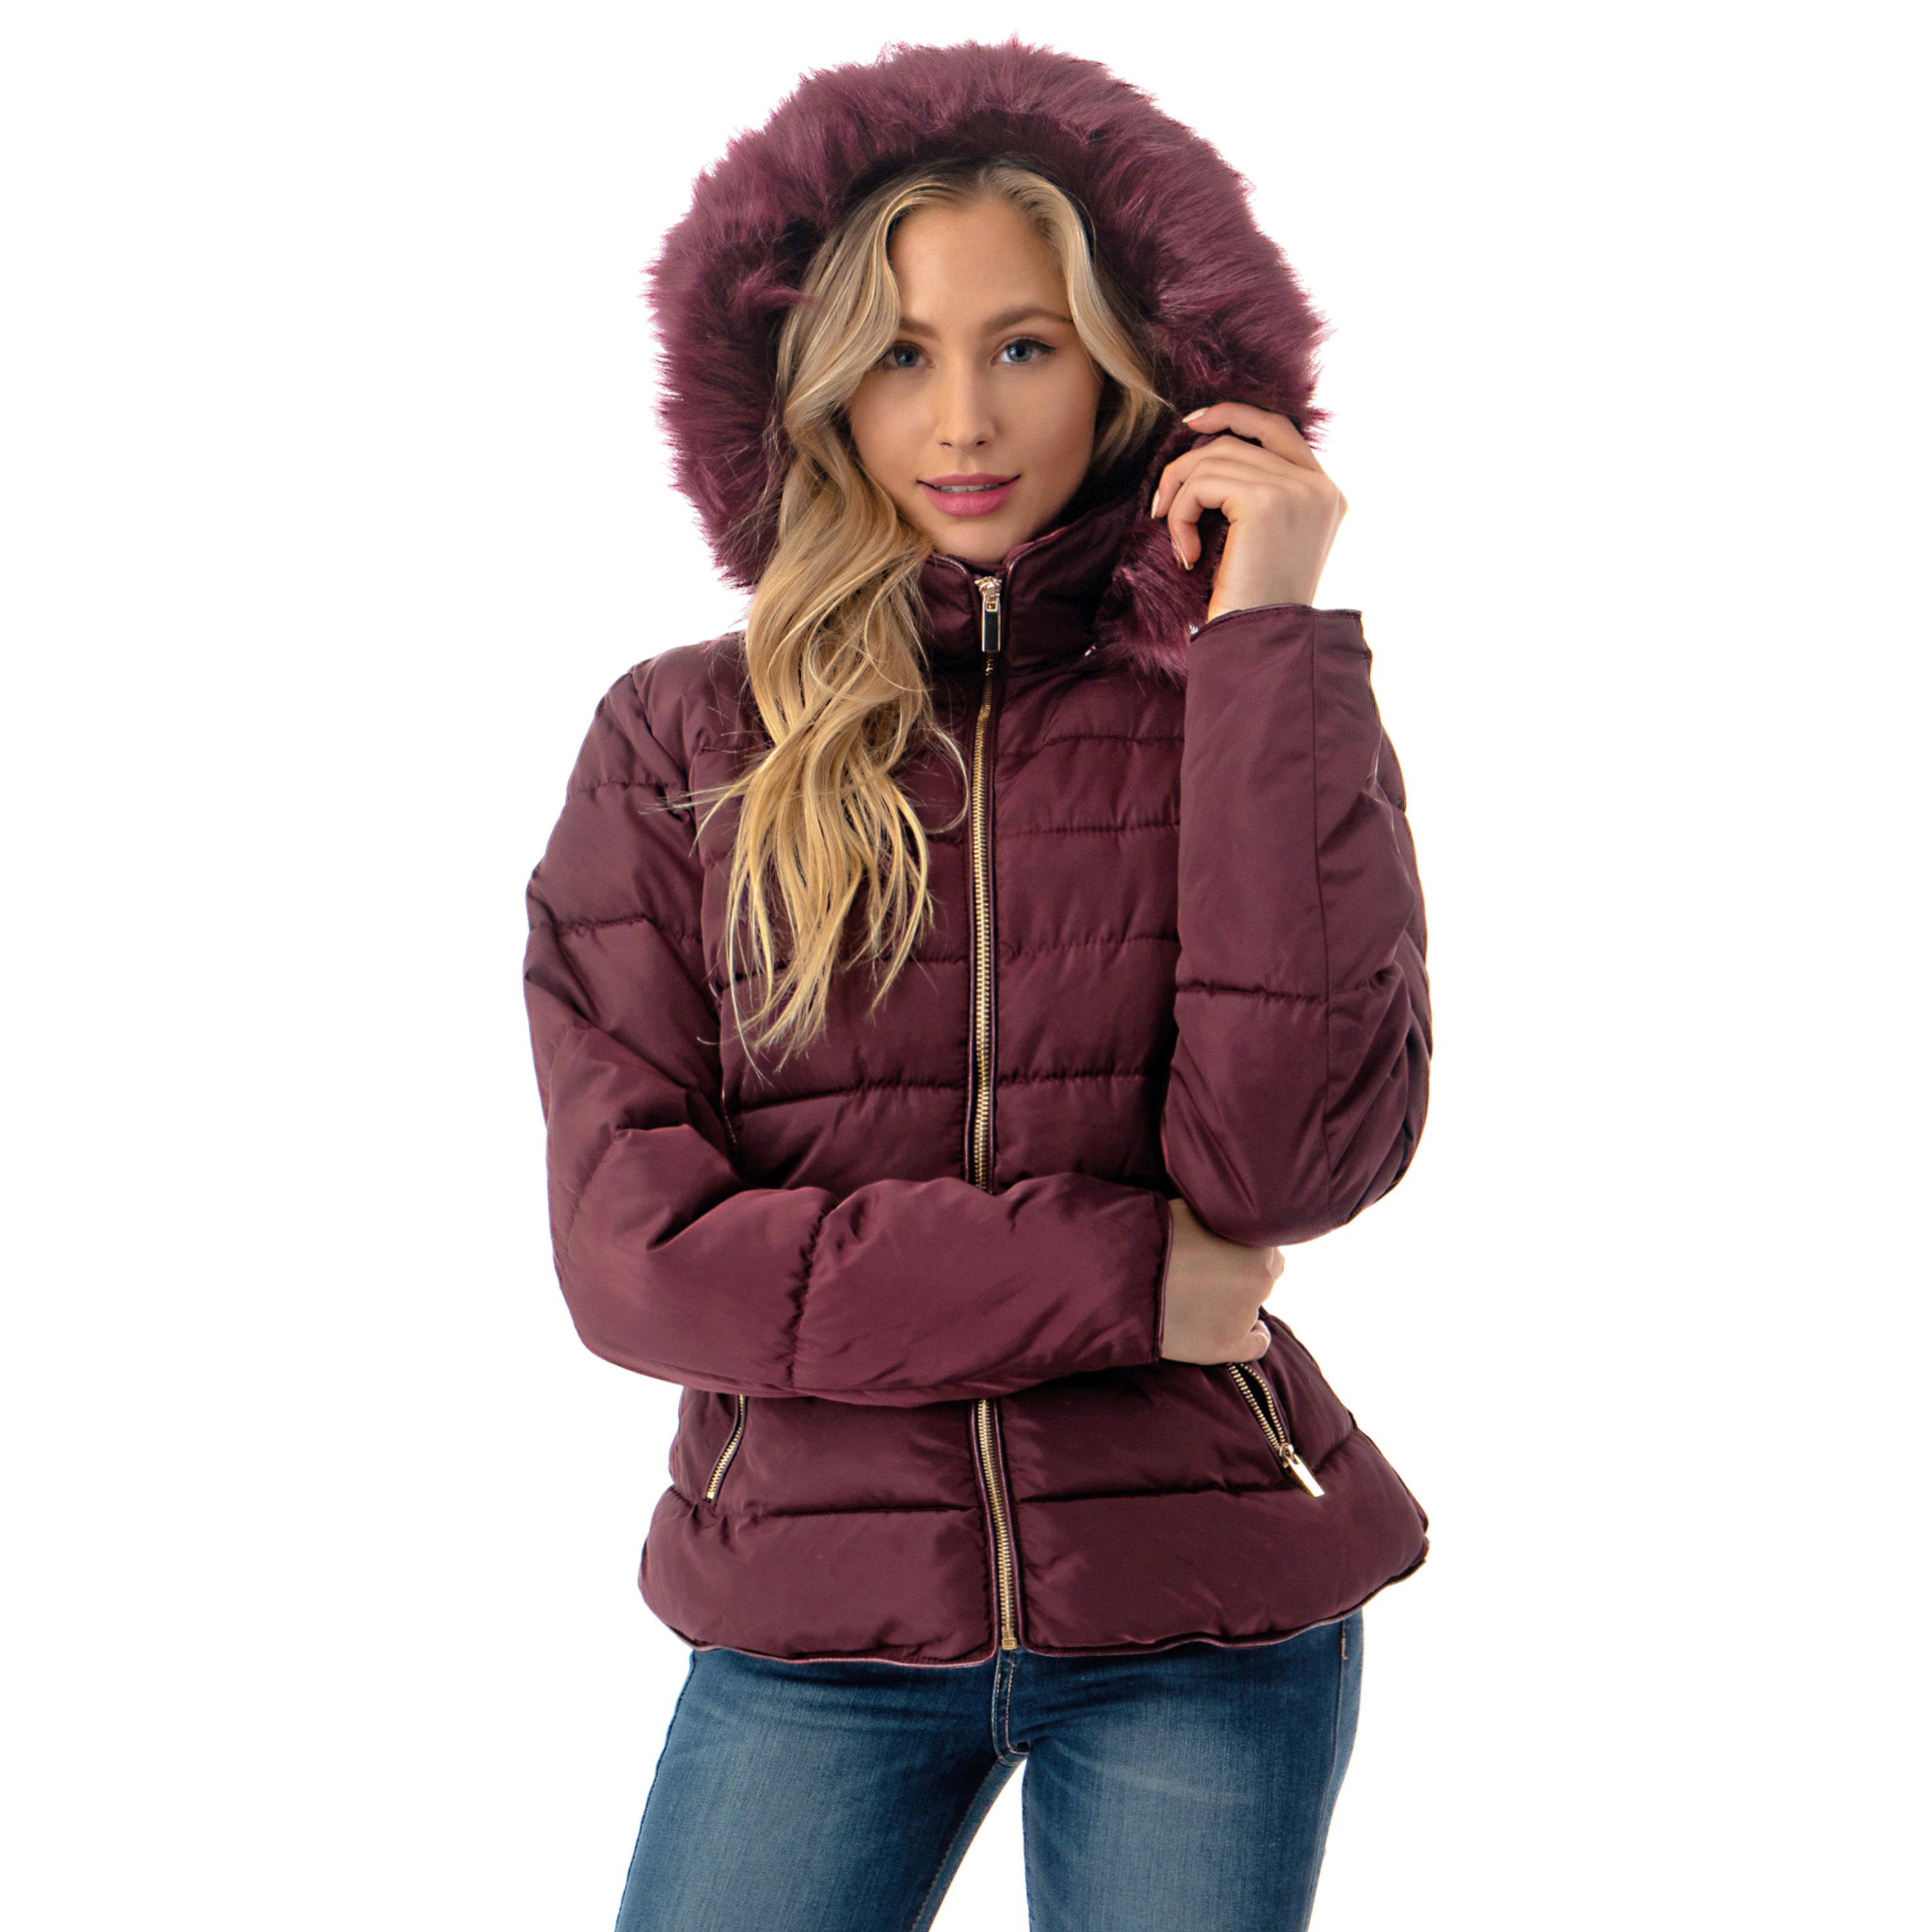 Fashionazzle Women's Short Puffer Coat with Removable Faux Fur Trim Hood Jacket - image 2 of 14